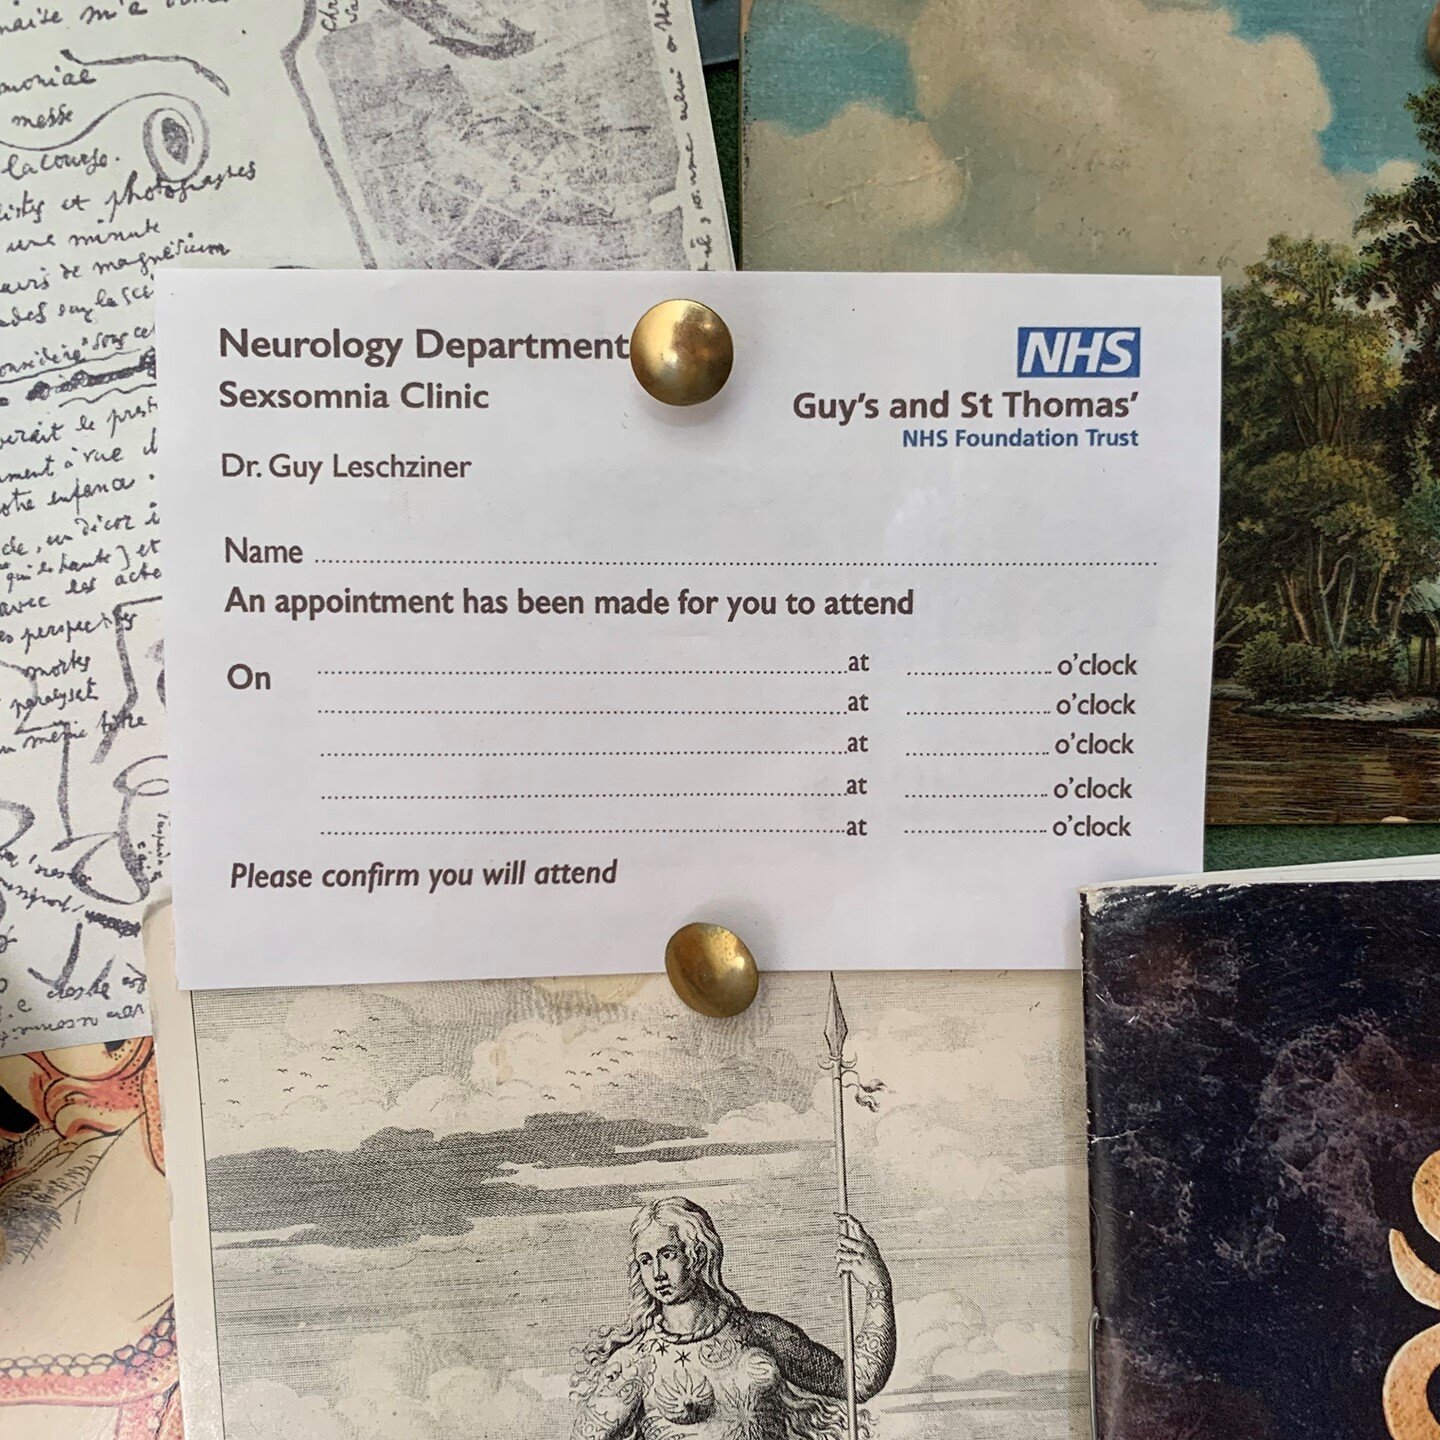 The Keeper's notice board has an array of curious miscellaneous items pinned to it.⁠
⁠
Today our eye is drawn to a lost appointment card for a Sexsomnia Clinic.⁠
⁠
Sexsomnia is a rare type of parasomnia sleep disorder, where an individual engages in 